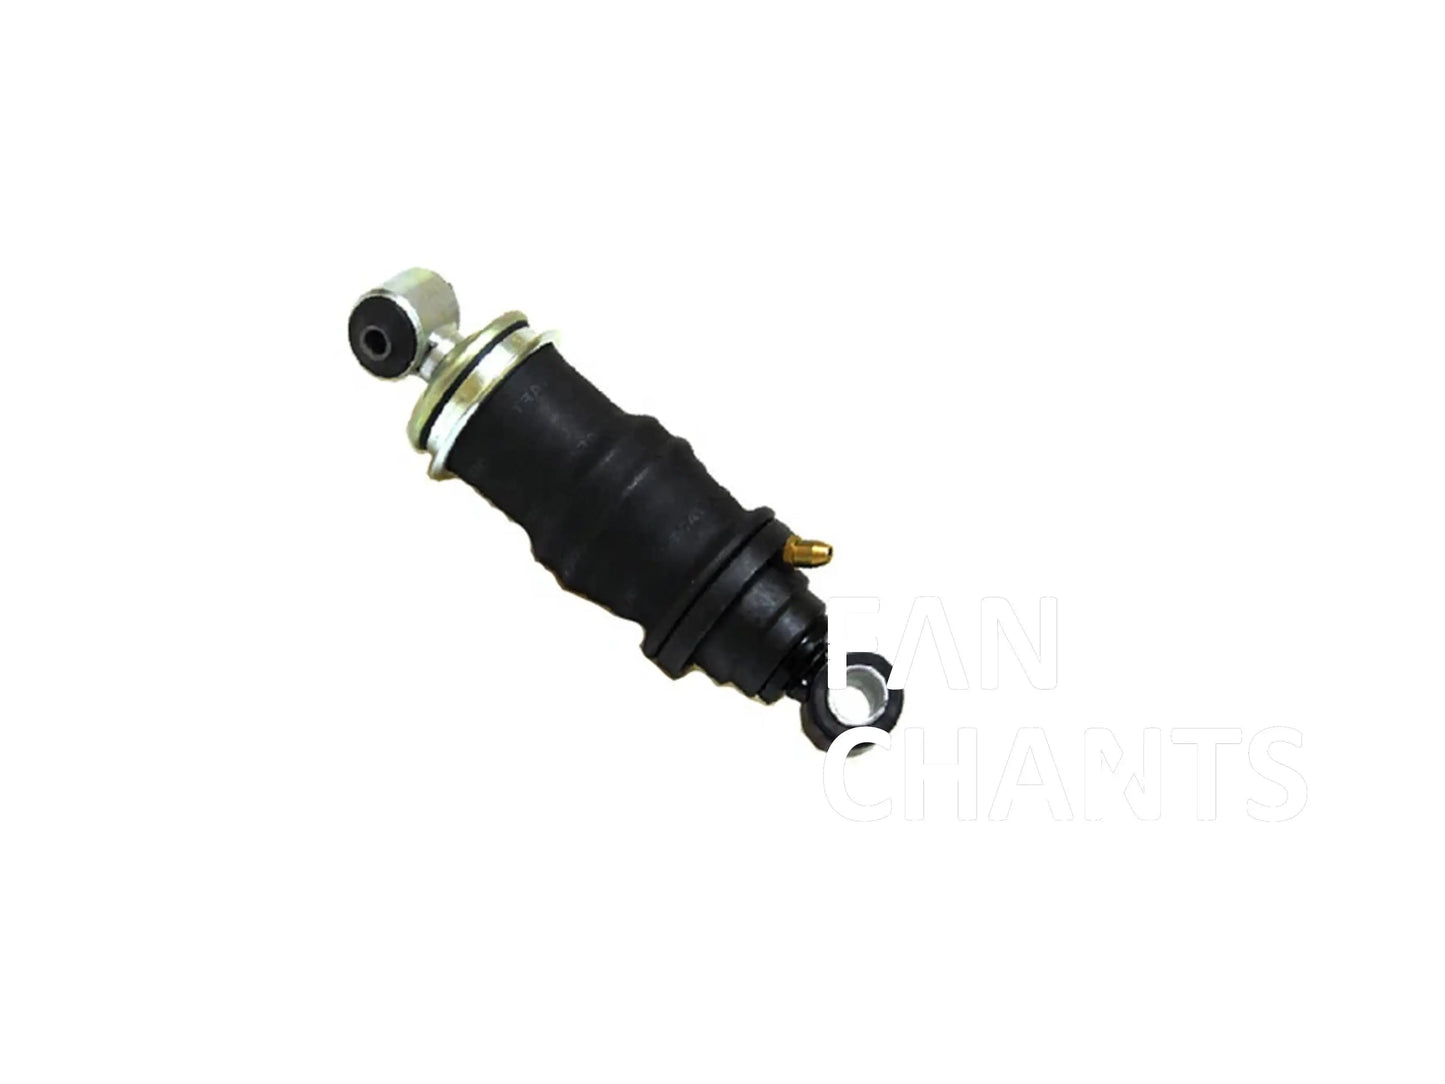 China Factory Wholesale 9428905219 9428907019 A9428905219 A9428907019 Shock Absorber for Mercedes-Benz FANCHANTS China Auto Parts Wholesales